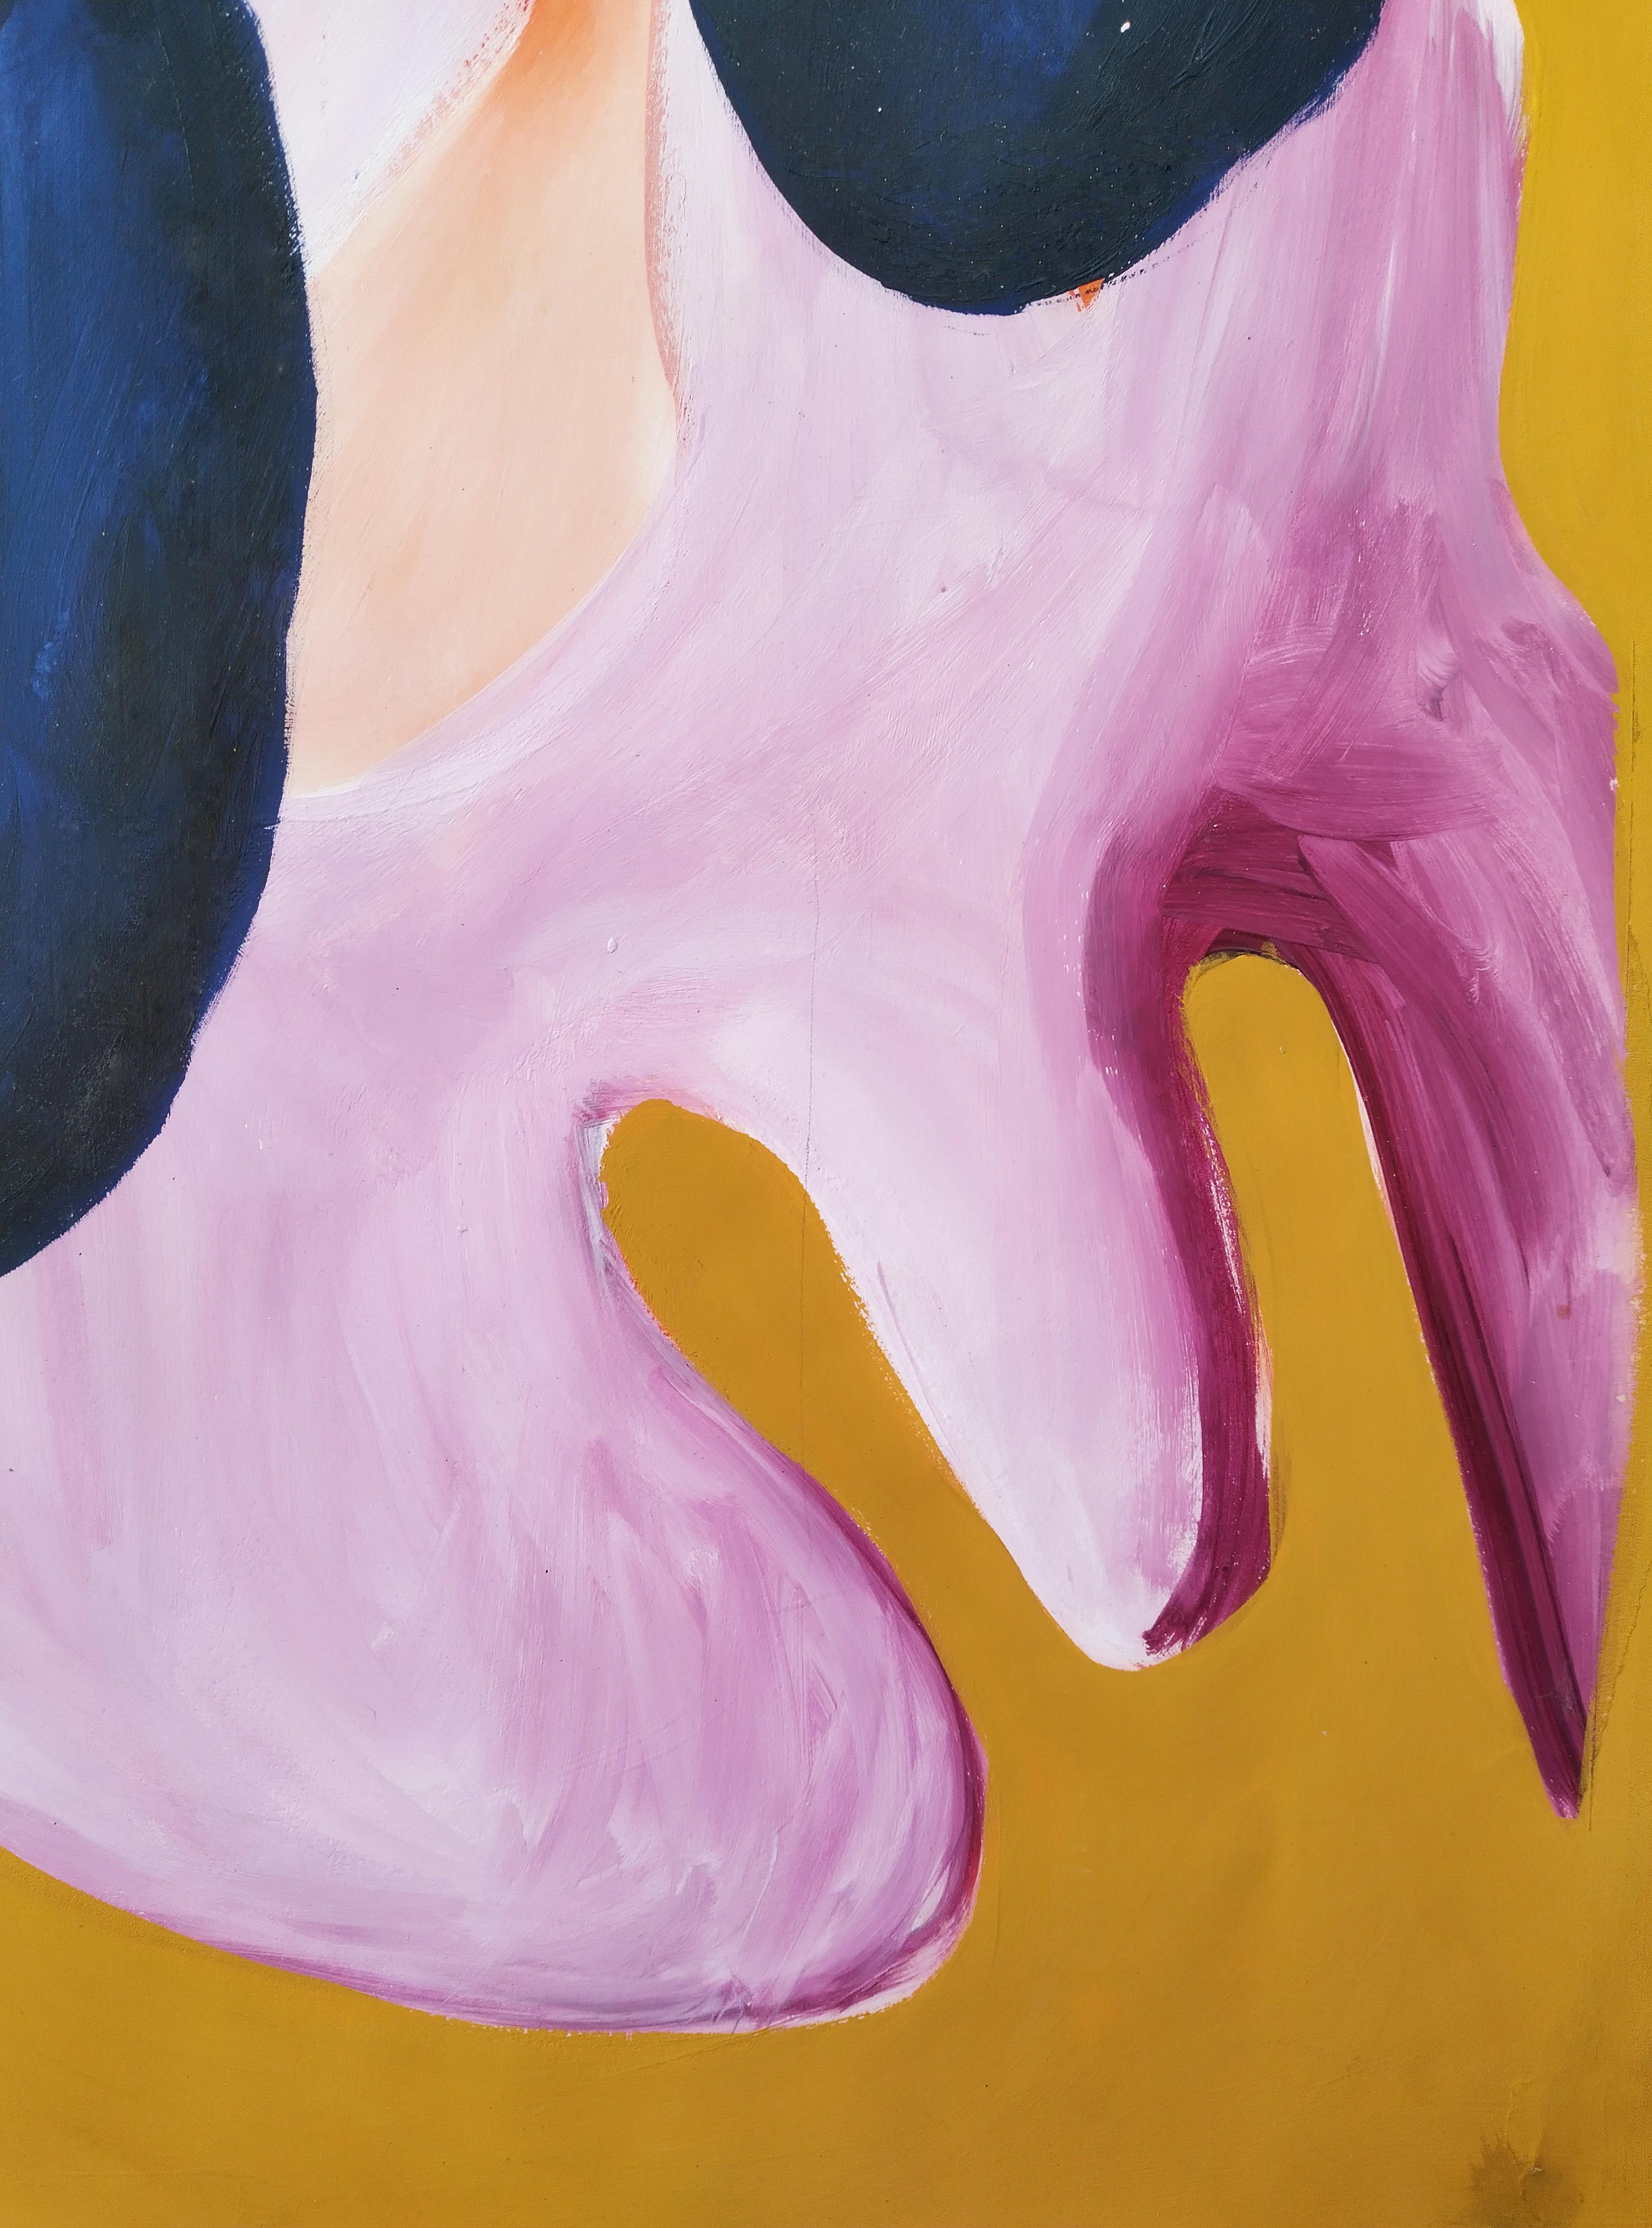 Snippets in My Hair, Don't Care, Acrylic on Paper, 59x42 cm, 2019 - Contemporary Painting by Madeleine Mesam